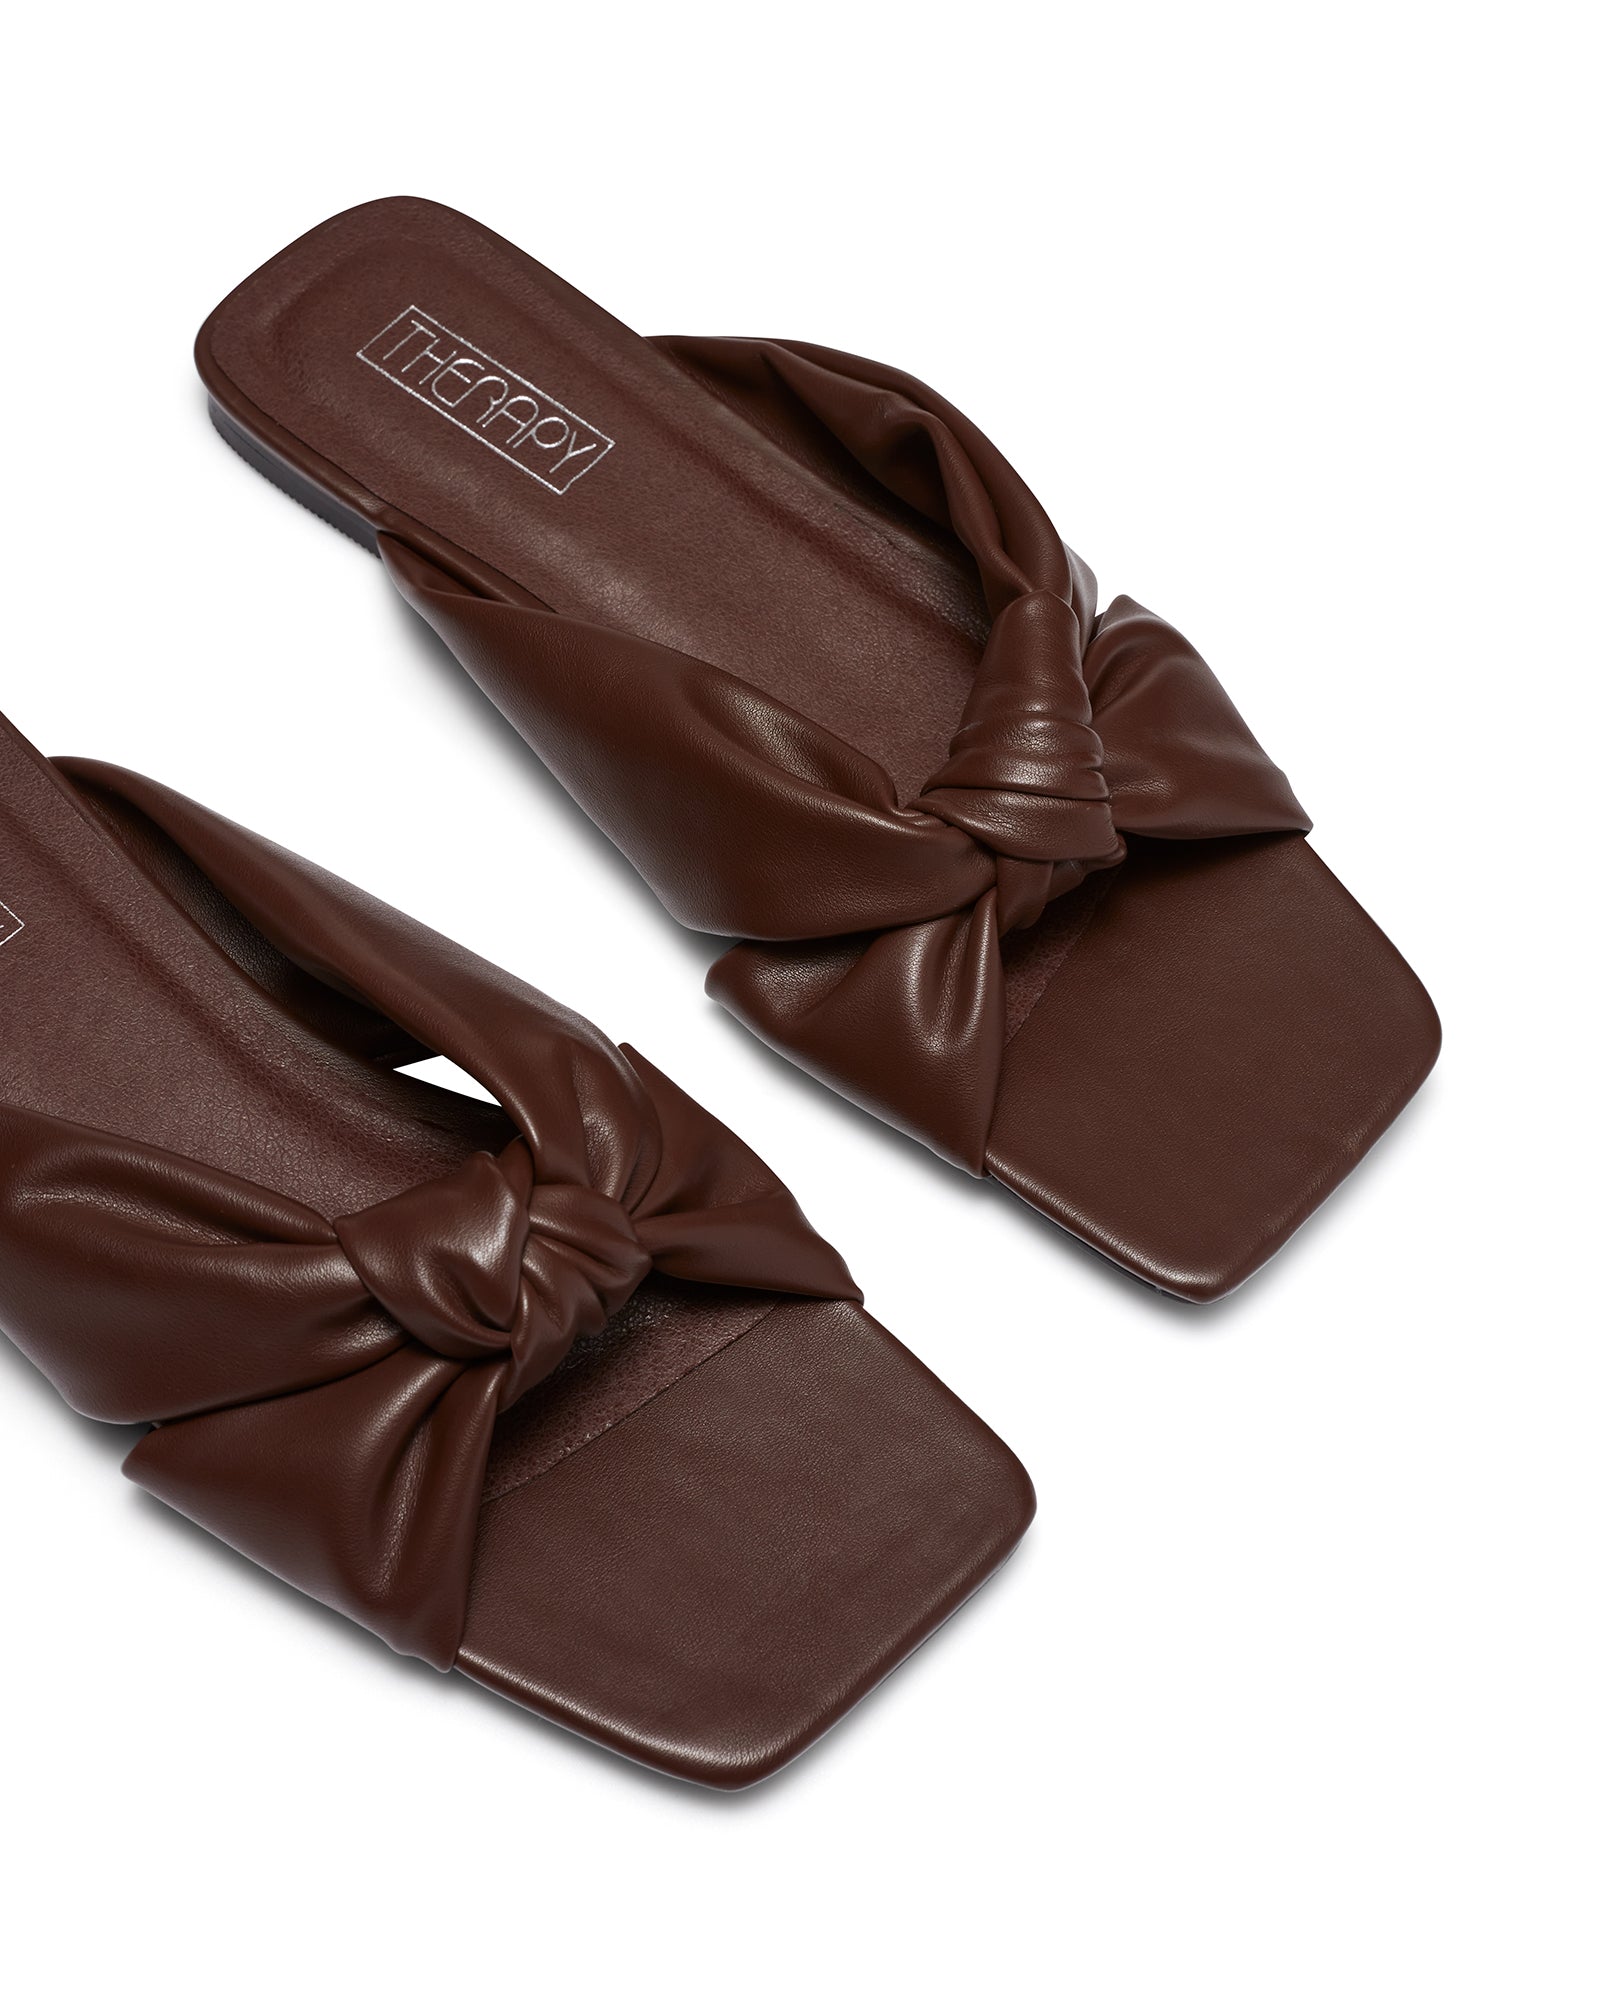 Therapy Shoes Sofia Chocolate | Women's Flats | Slides | Sandals | Knot